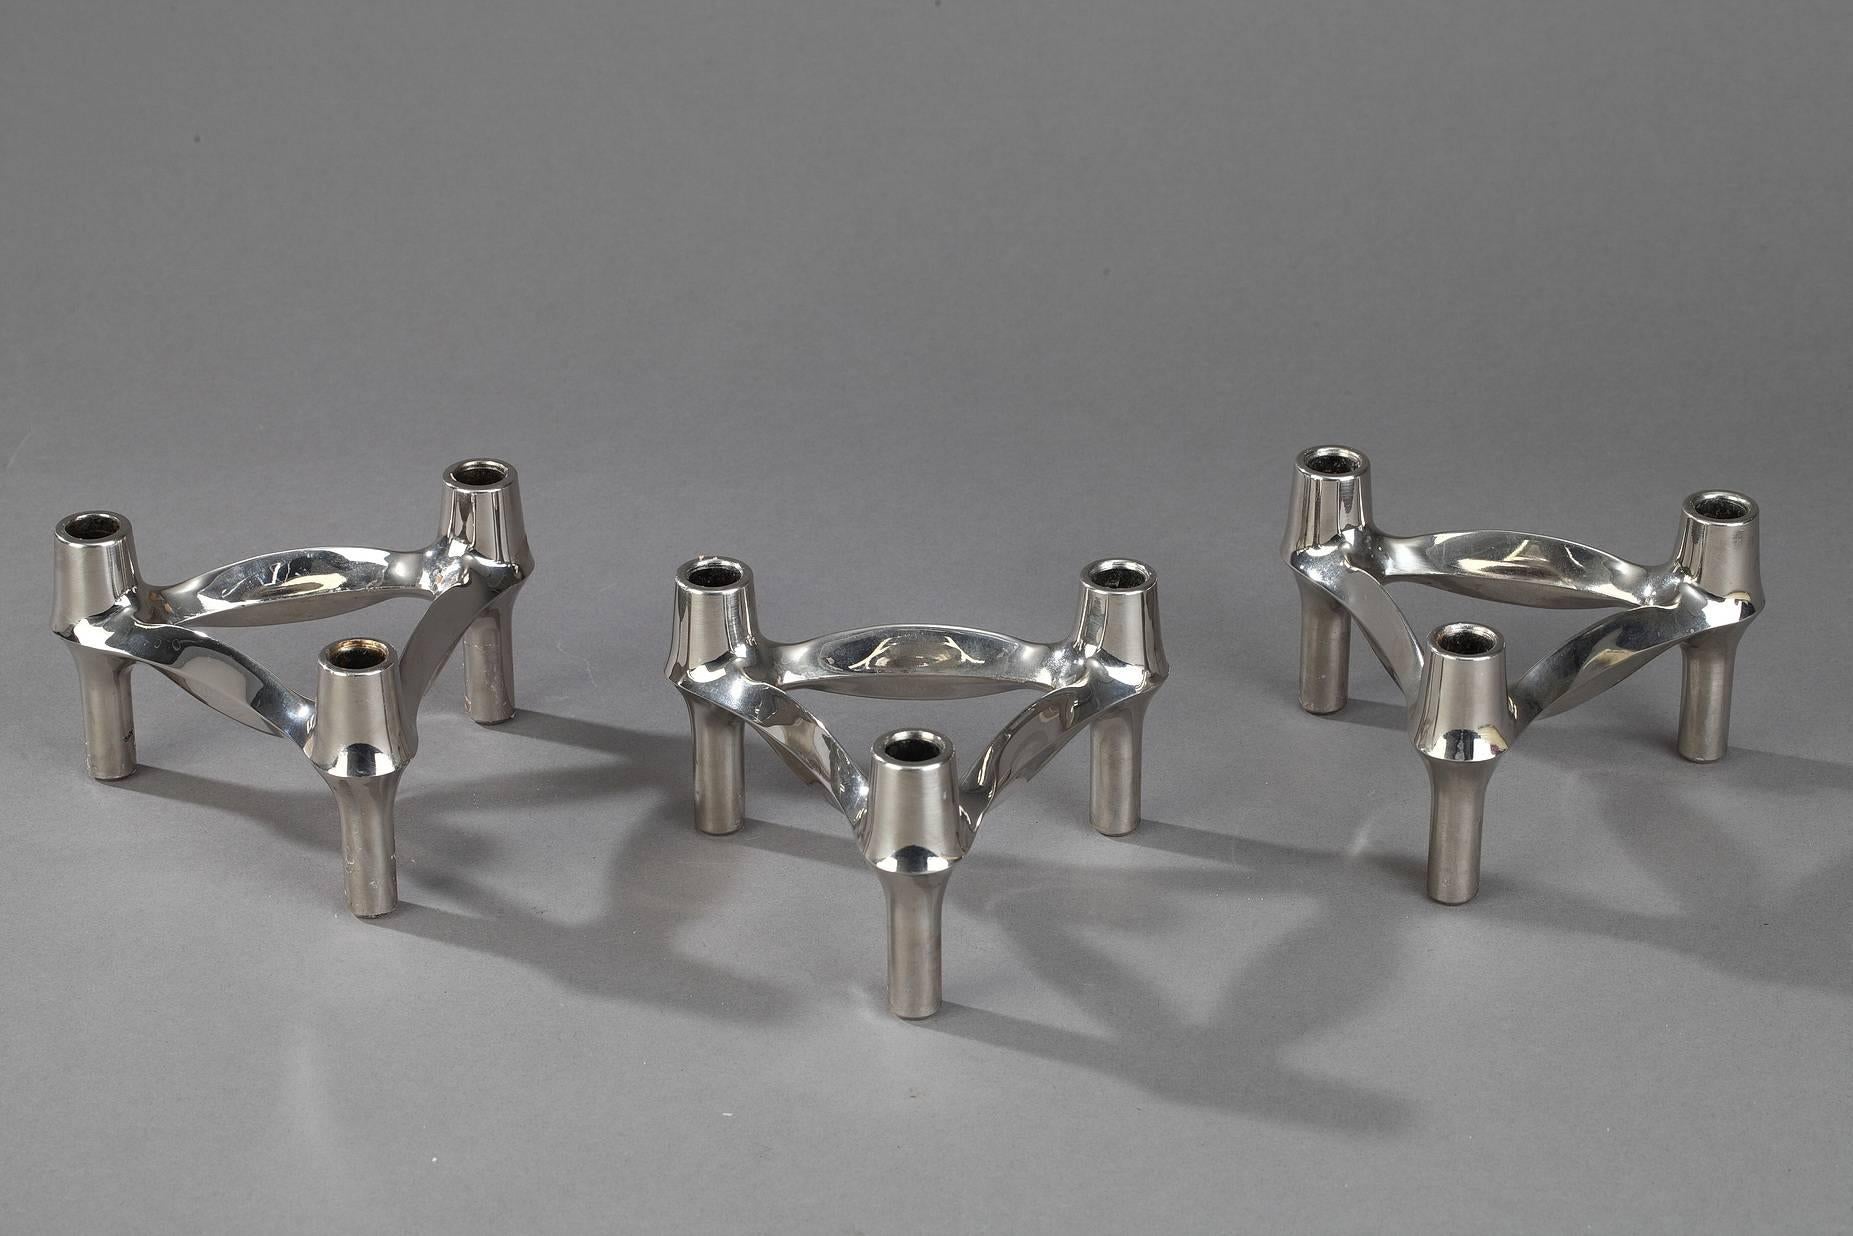 Three chrome-plated metal candlesticks produced by BMF (Bayerische Metallwarenfabrik) in Germany in the 1970s. As Nagel candleholders, BMF candlesticks can be used individually or assemble to create infinite various configurations,

circa